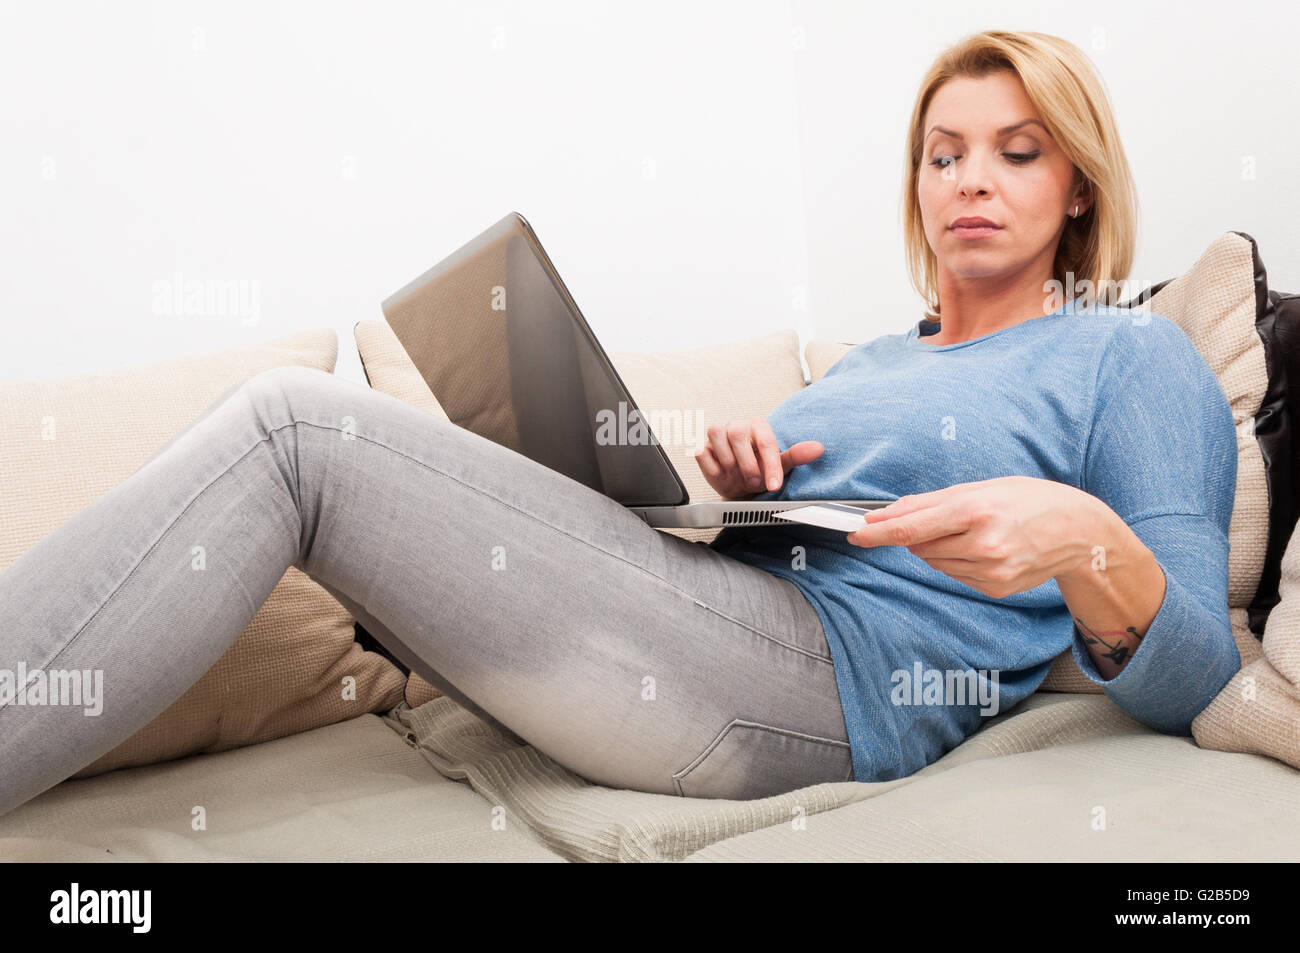 Woman using credit card for shopping online relaxed at home on sofa or couch Stock Photo